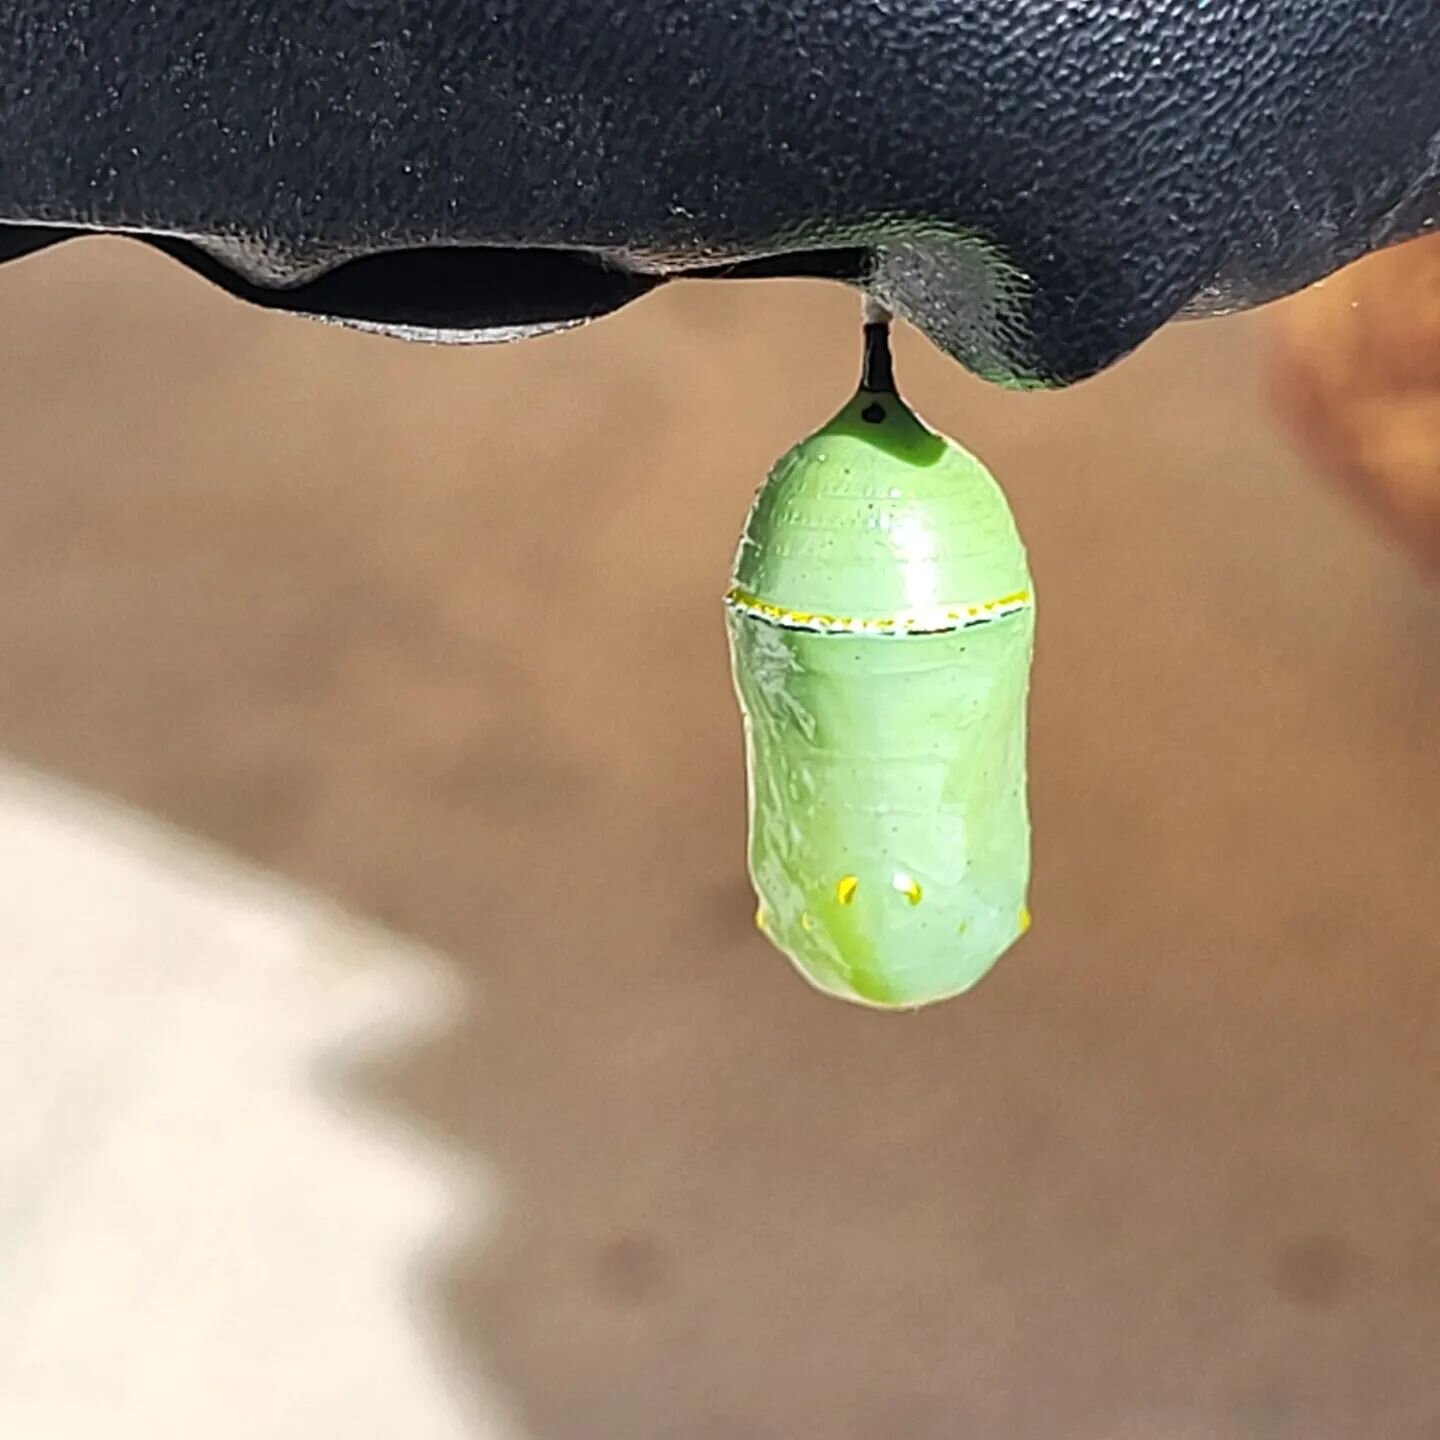 Backyard Sanctuary Adventures--- So 2 weeks ago a chrysalis formed under my outdoor weight bench. Then last week a curious caterpillar attached itself to our outdoor table. I checked on it yesterday and it was still and hanging in a somewhat fetal po